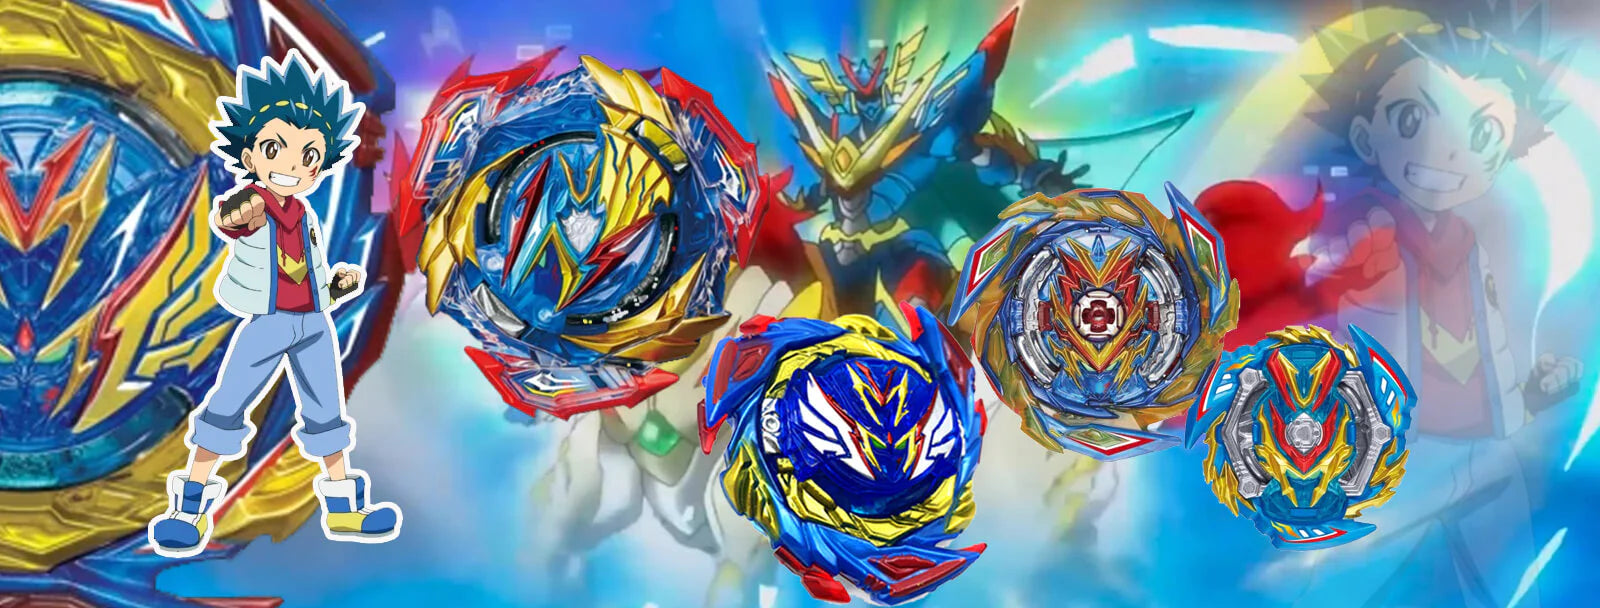 Beyblades: The Craze, History, and Enduring Sport of Spinning Tops – Vapor95